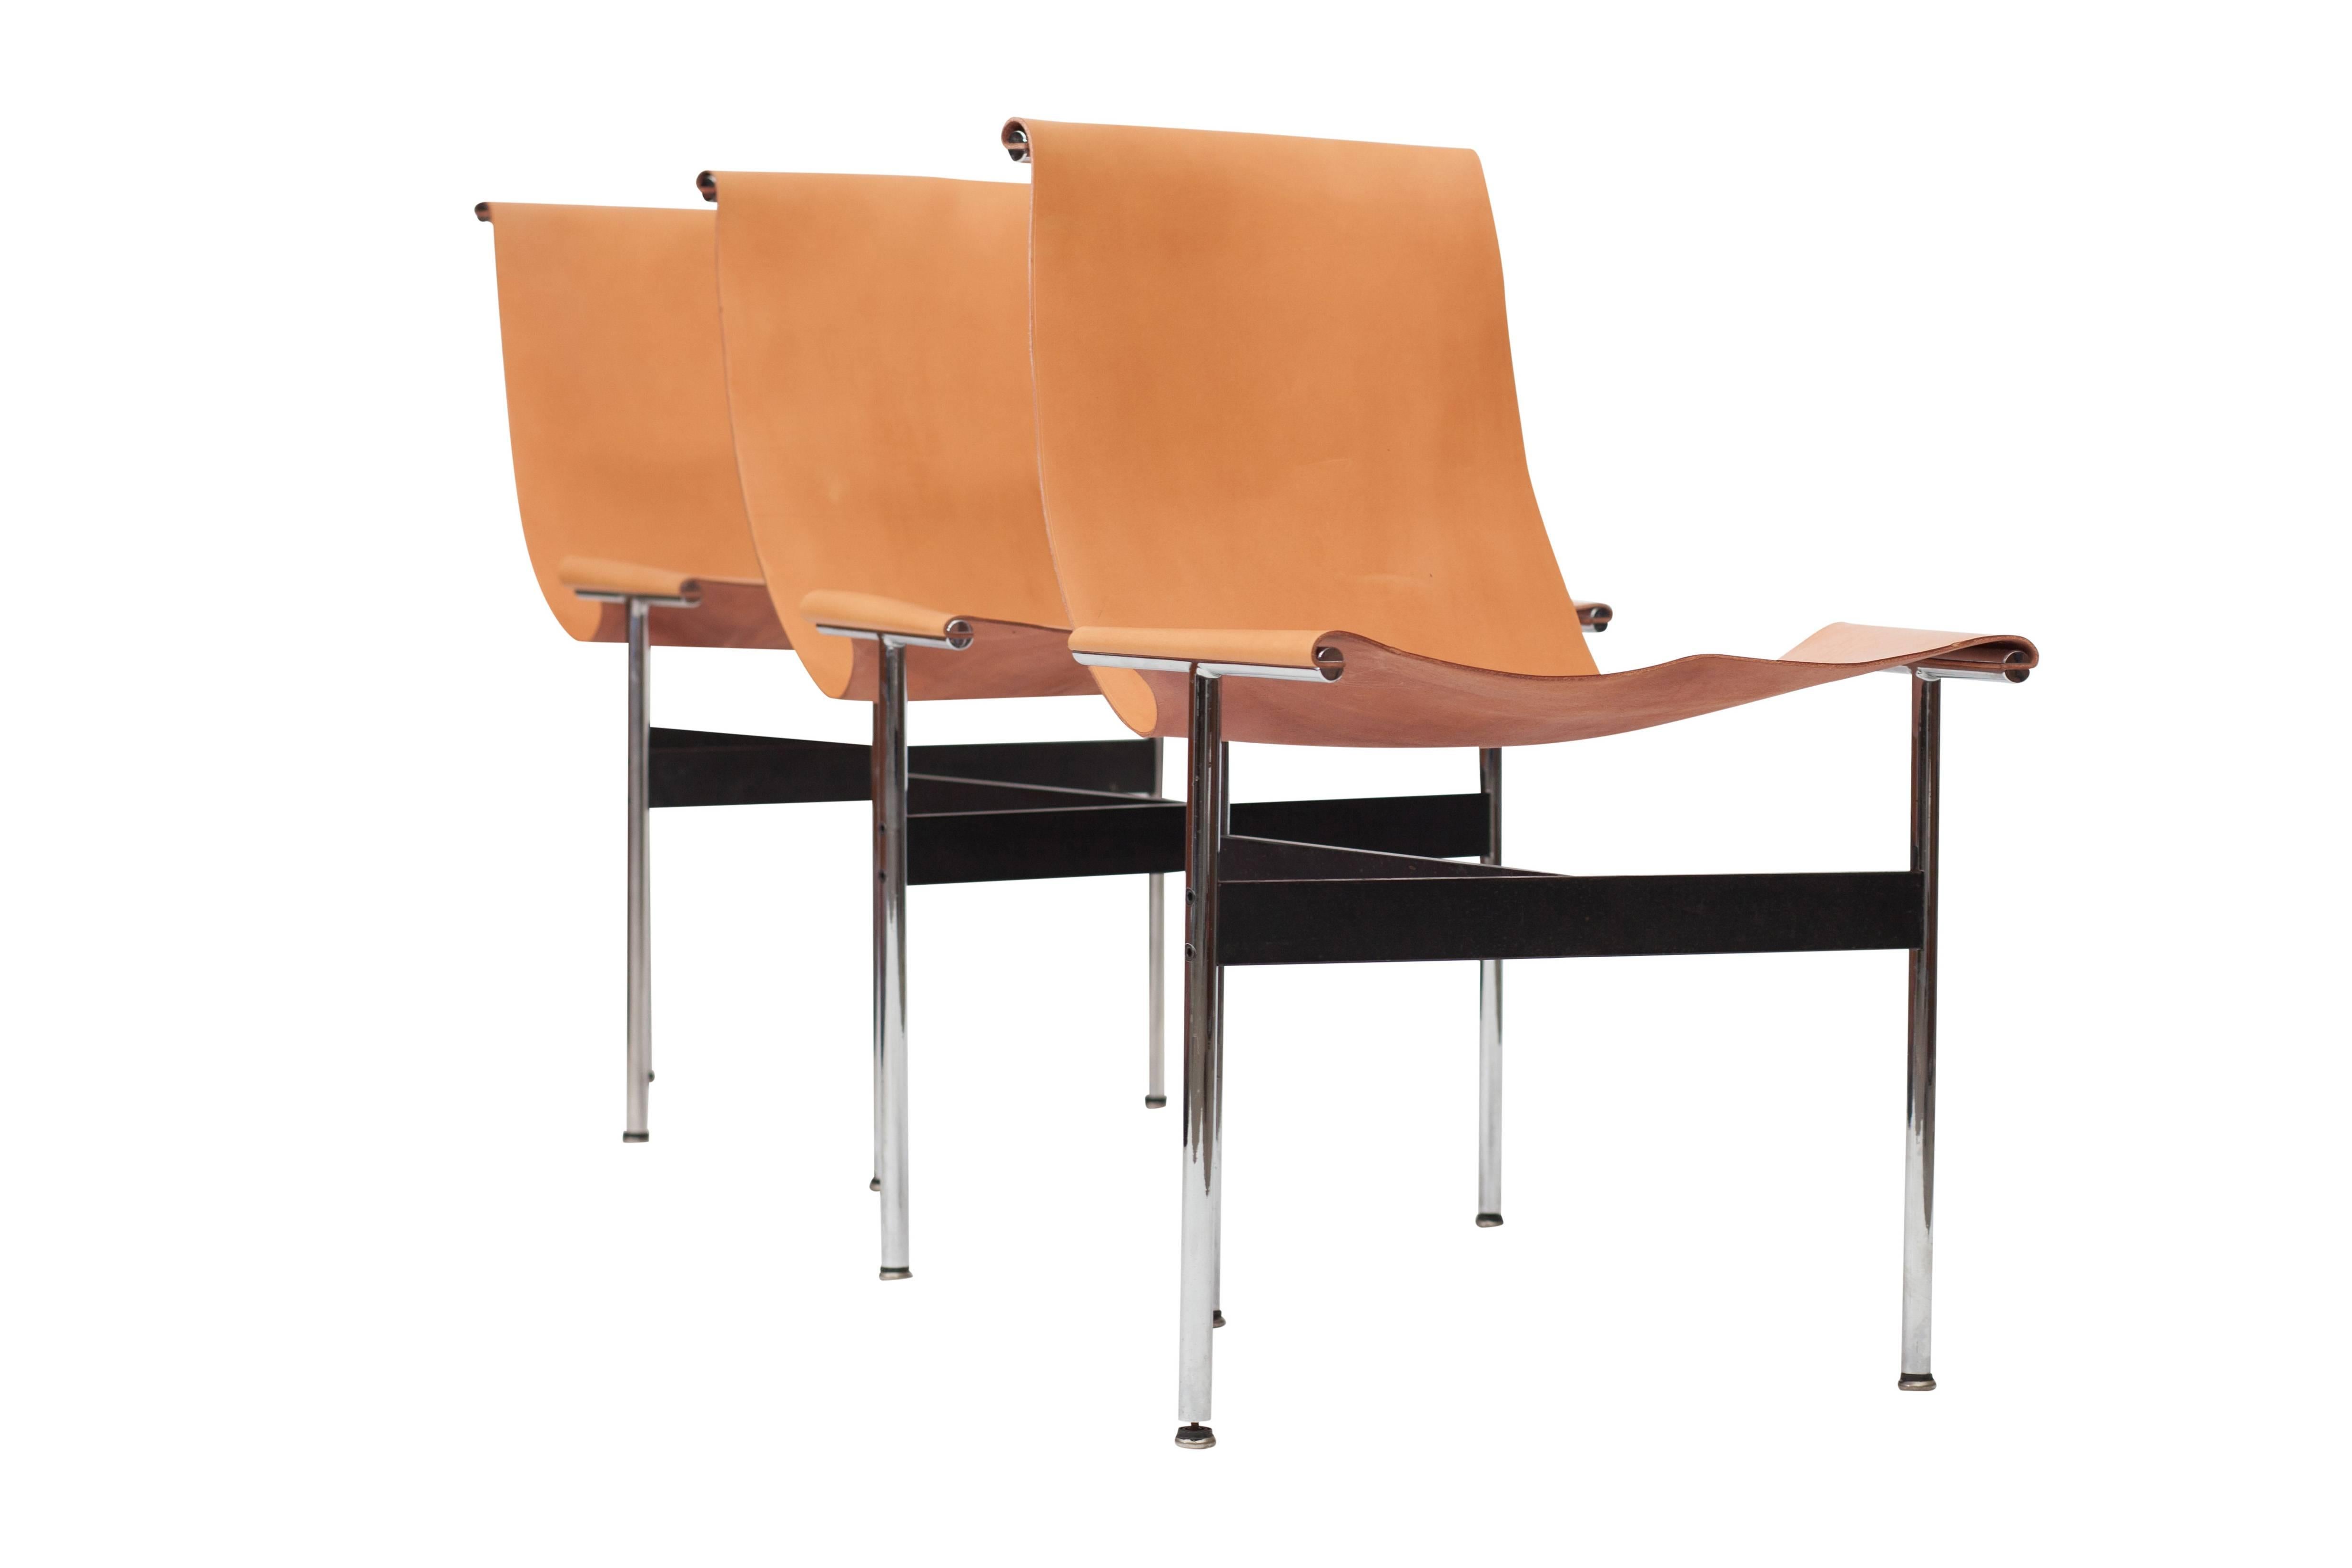 Steel Laverne International T Chairs in Natural Cognac Leather by Ross Littel